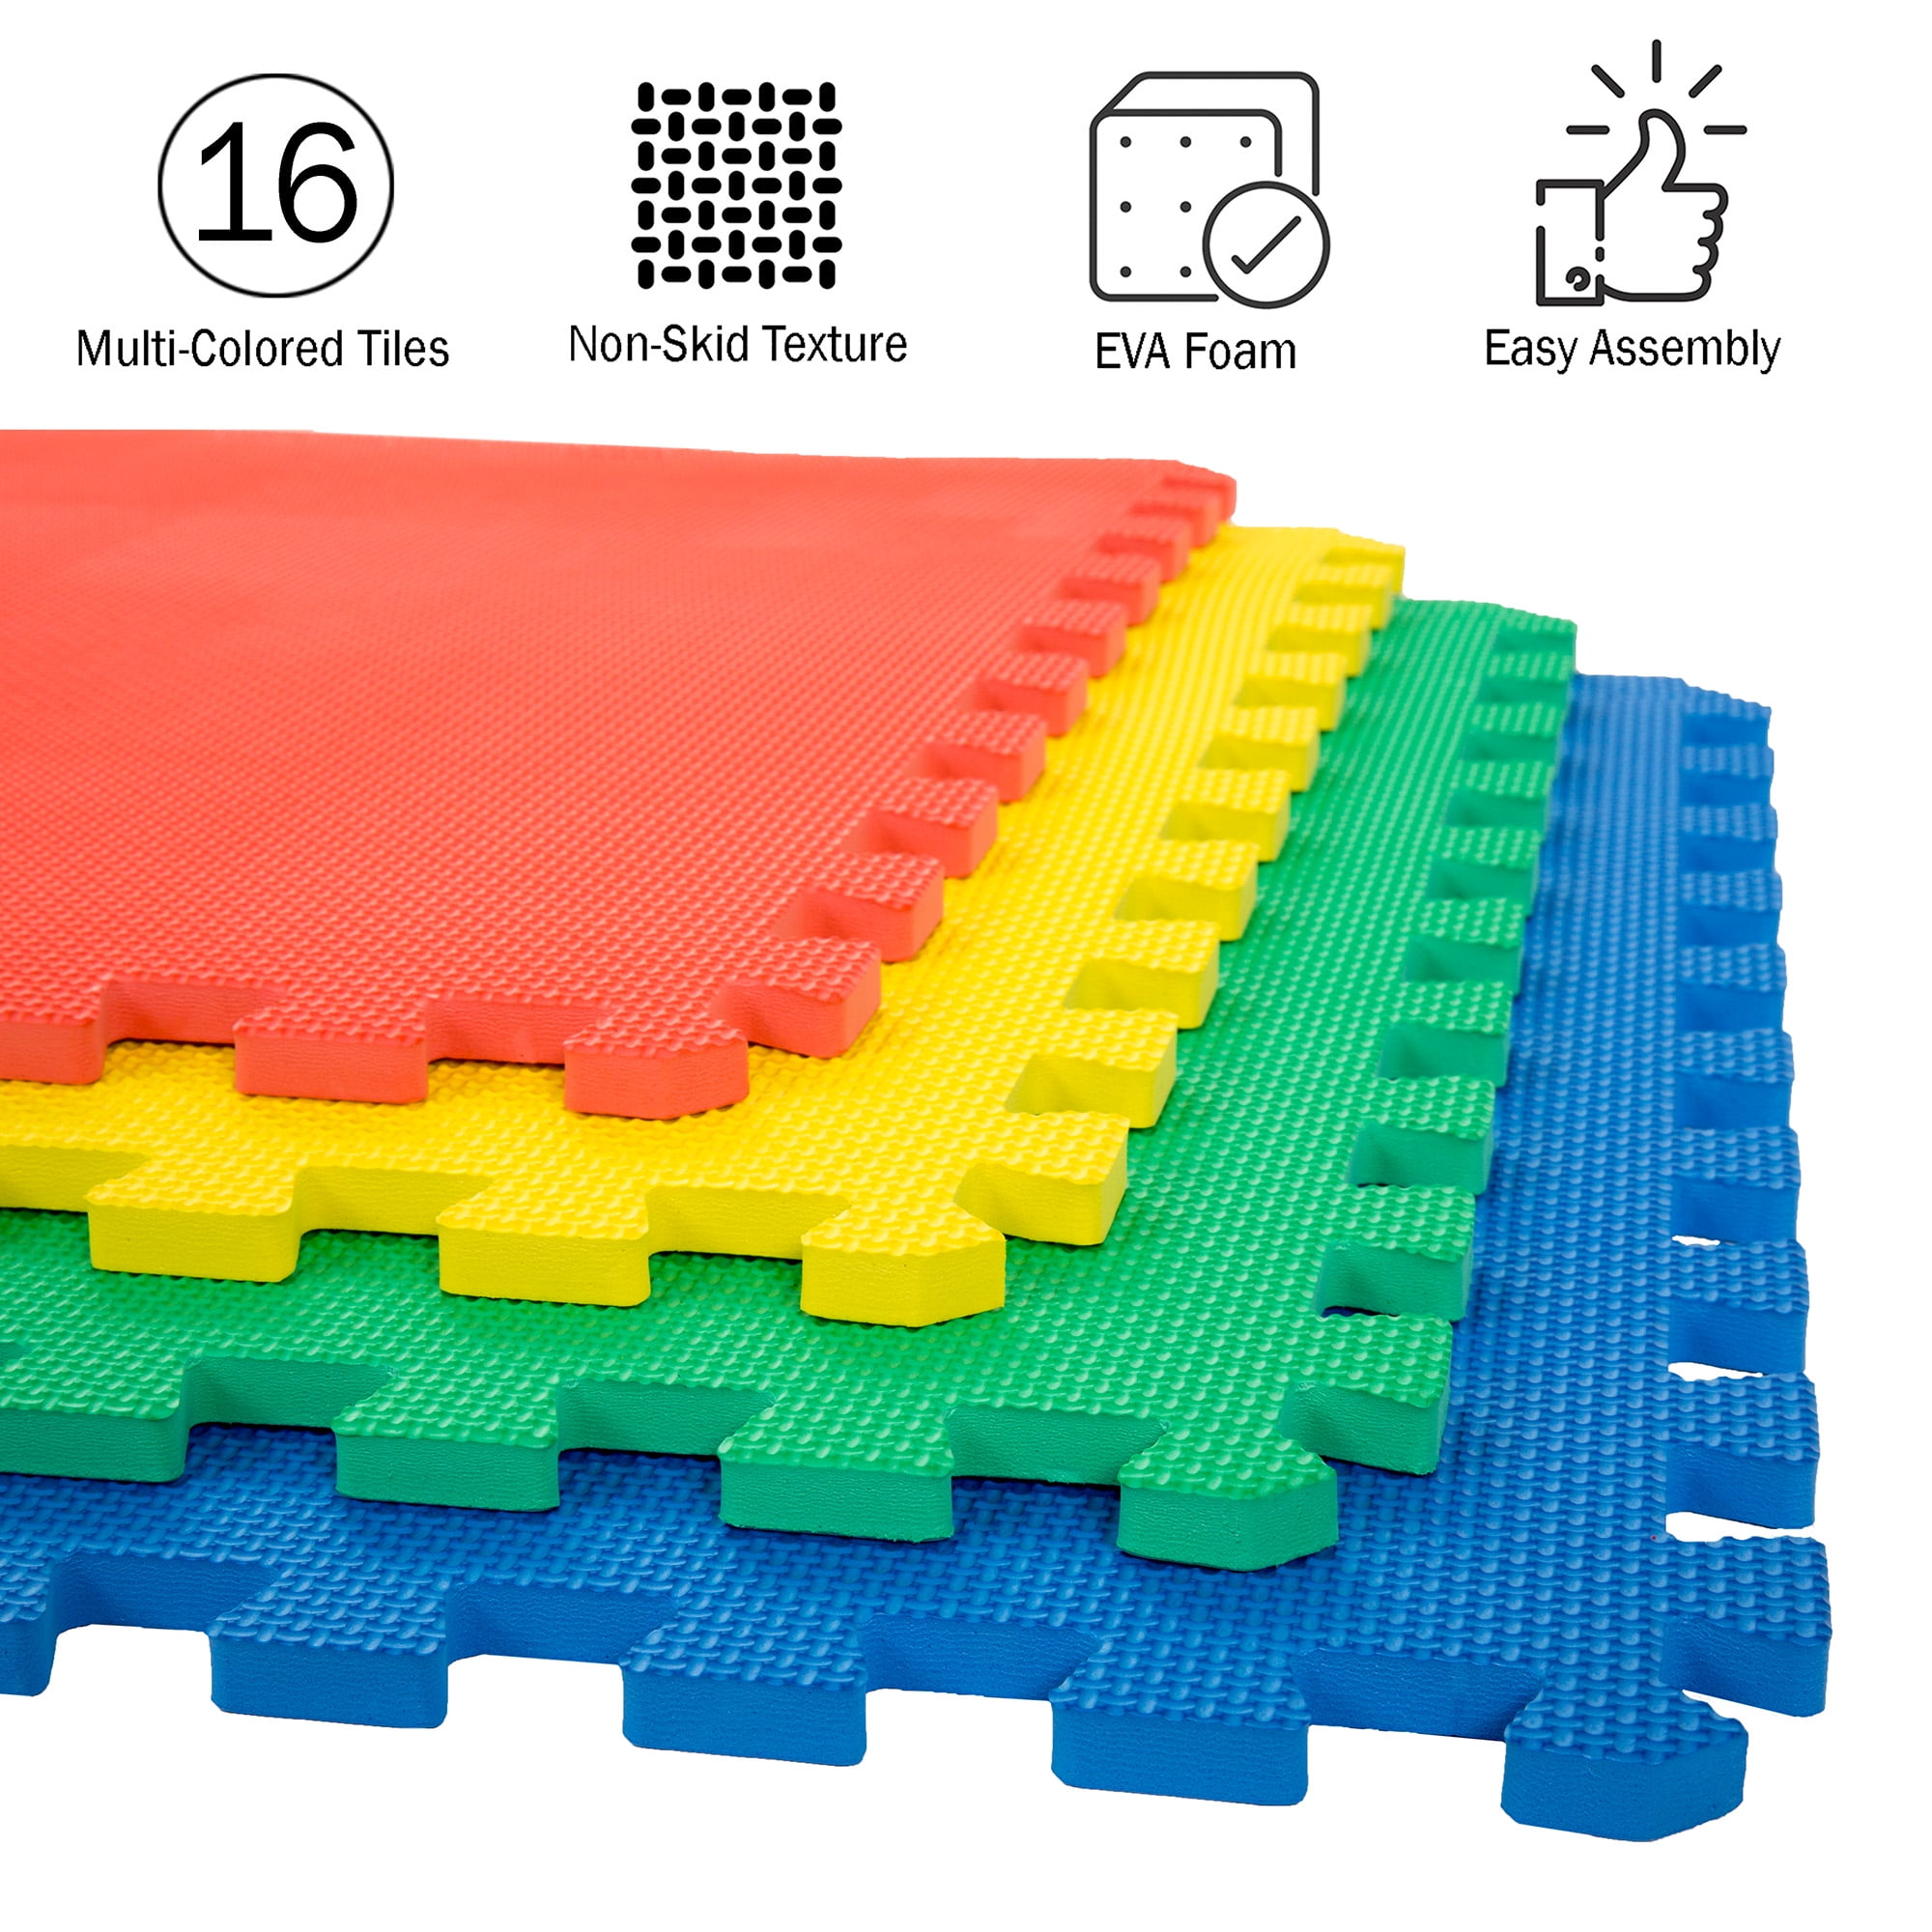 Foam Floor Mats - Interlocking EVA Foam Padding for Home Gym - Non-Toxic  8-Piece Play Mat Set by Stalwart (Multicolor) - On Sale - Bed Bath & Beyond  - 5989905